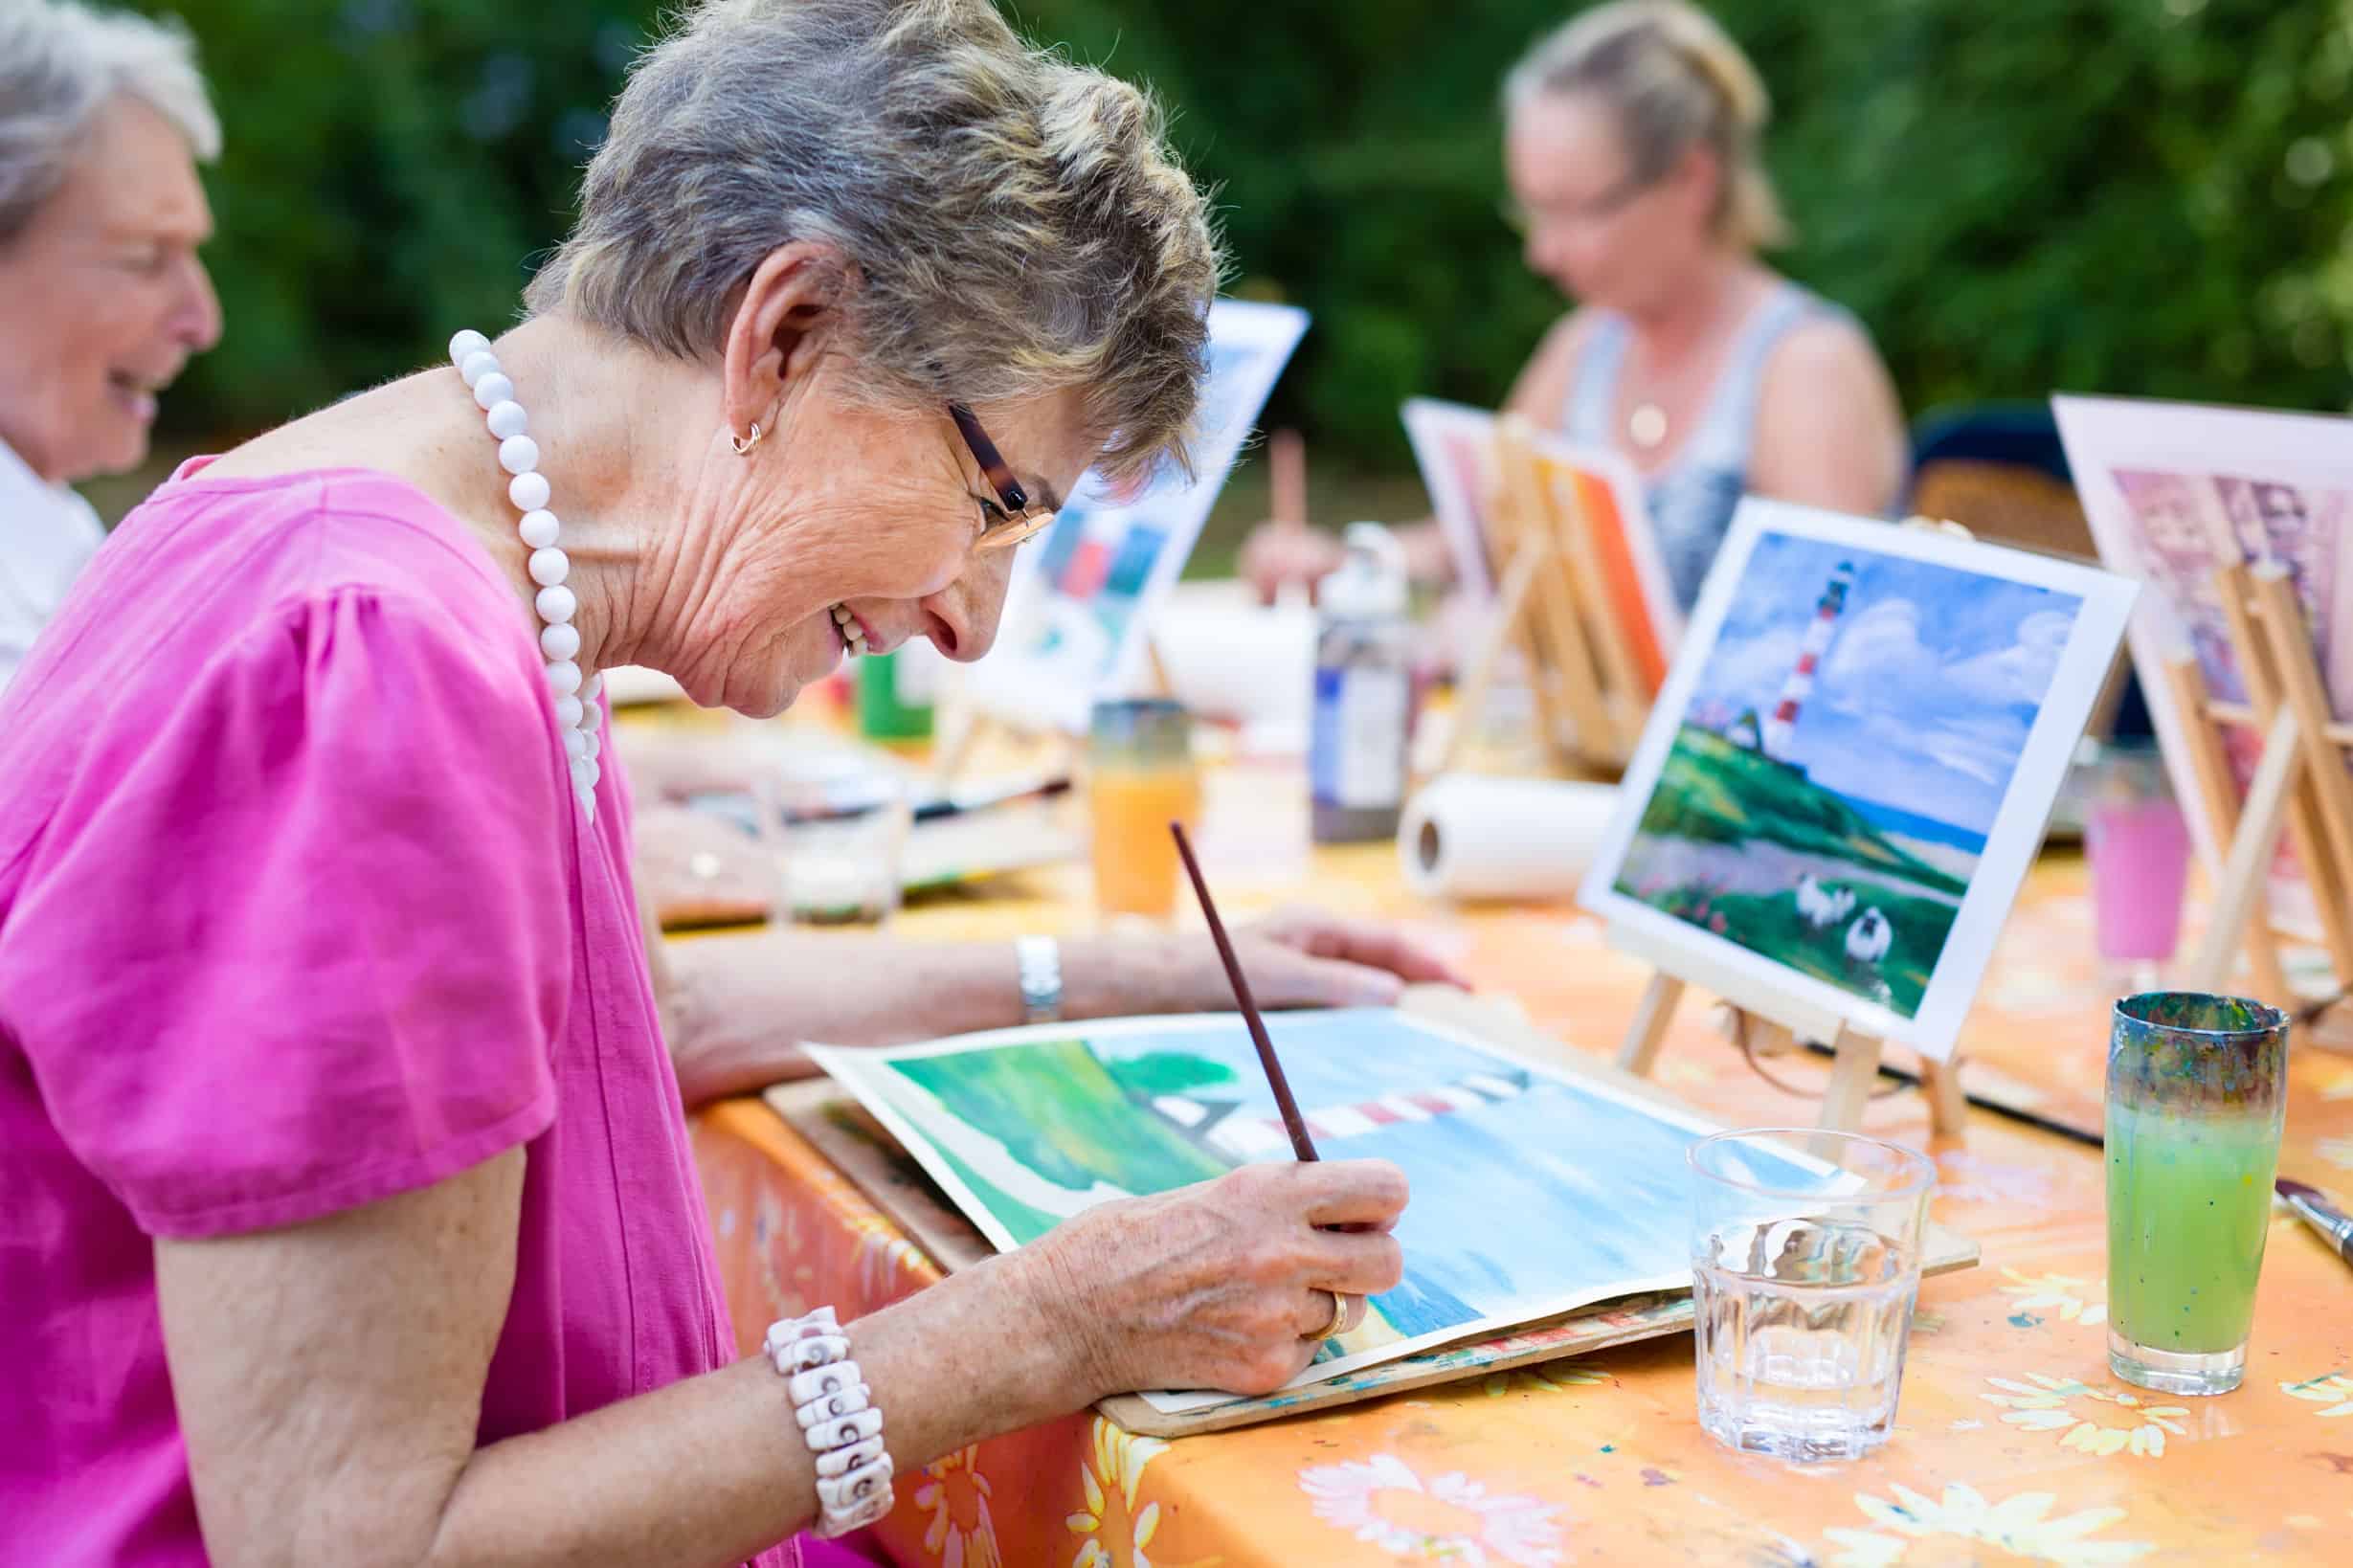 Free Online Activities for Seniors With an Interest in Art During COVID-19